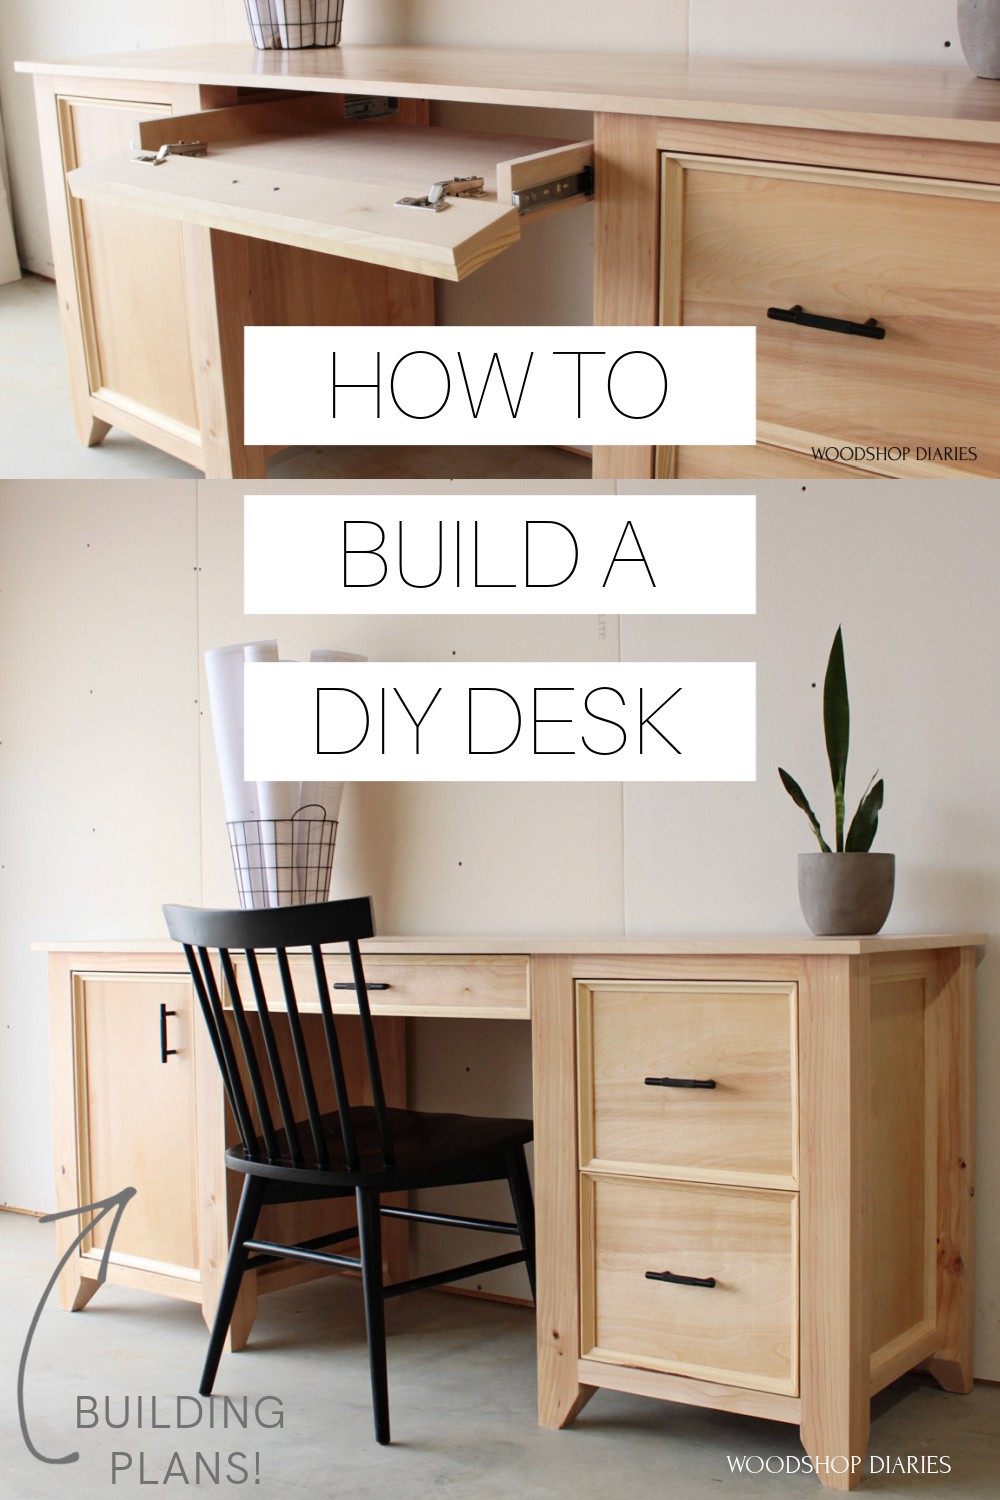 Pinterest collage with keyboard tray open at top and finished DIY computer desk on bottom with text "how to build a DIY desk"